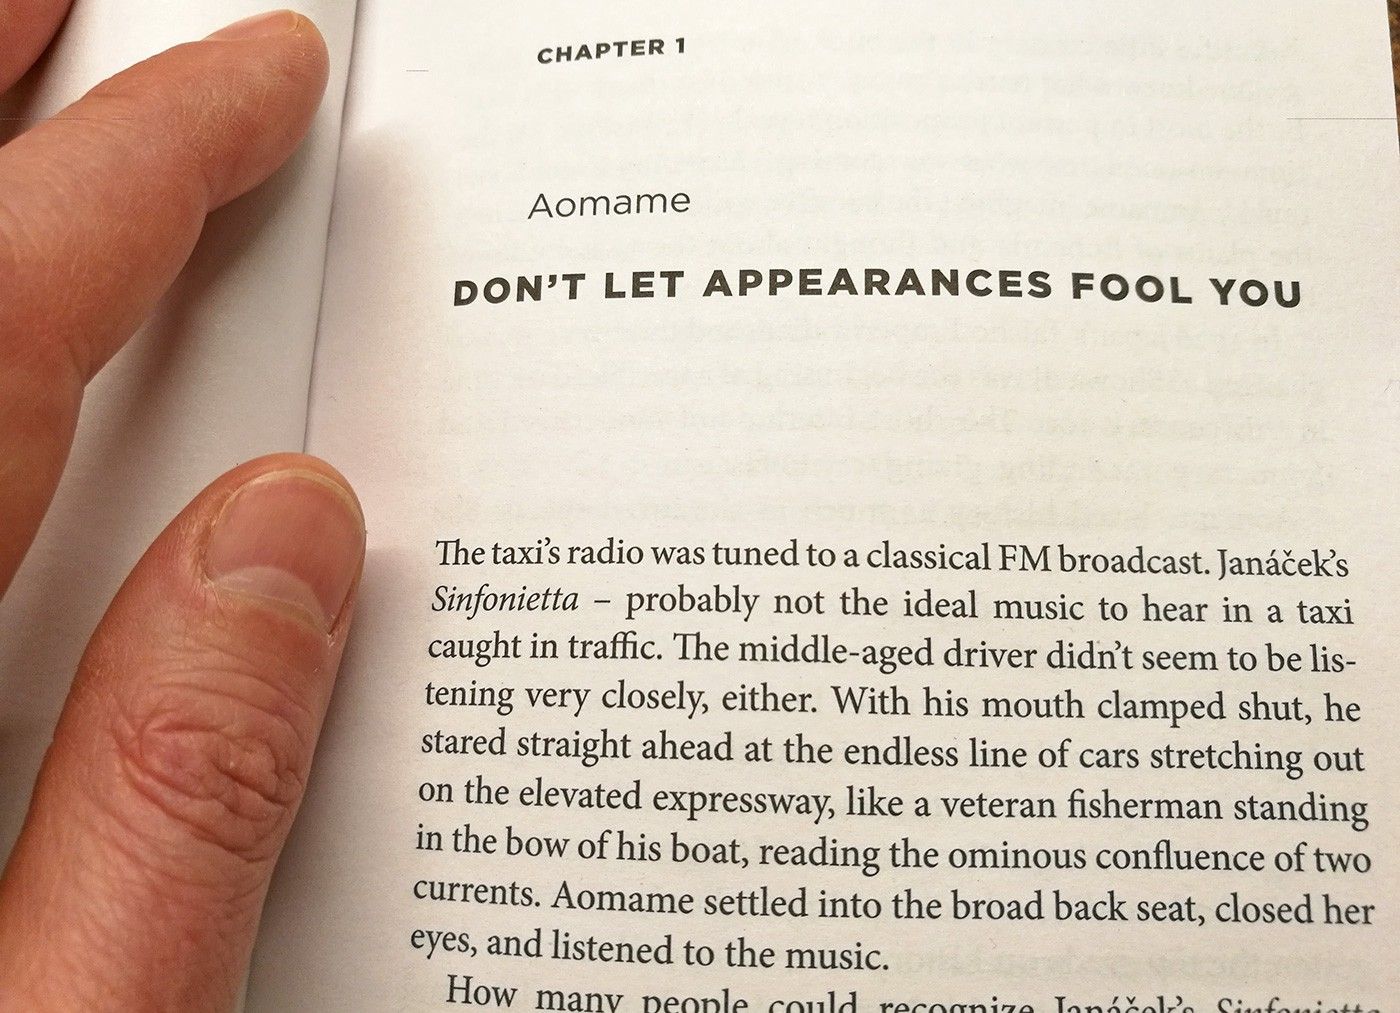 Photograph of page three of Haruki Murakami’s 1Q84 trilogy, taken by the author.